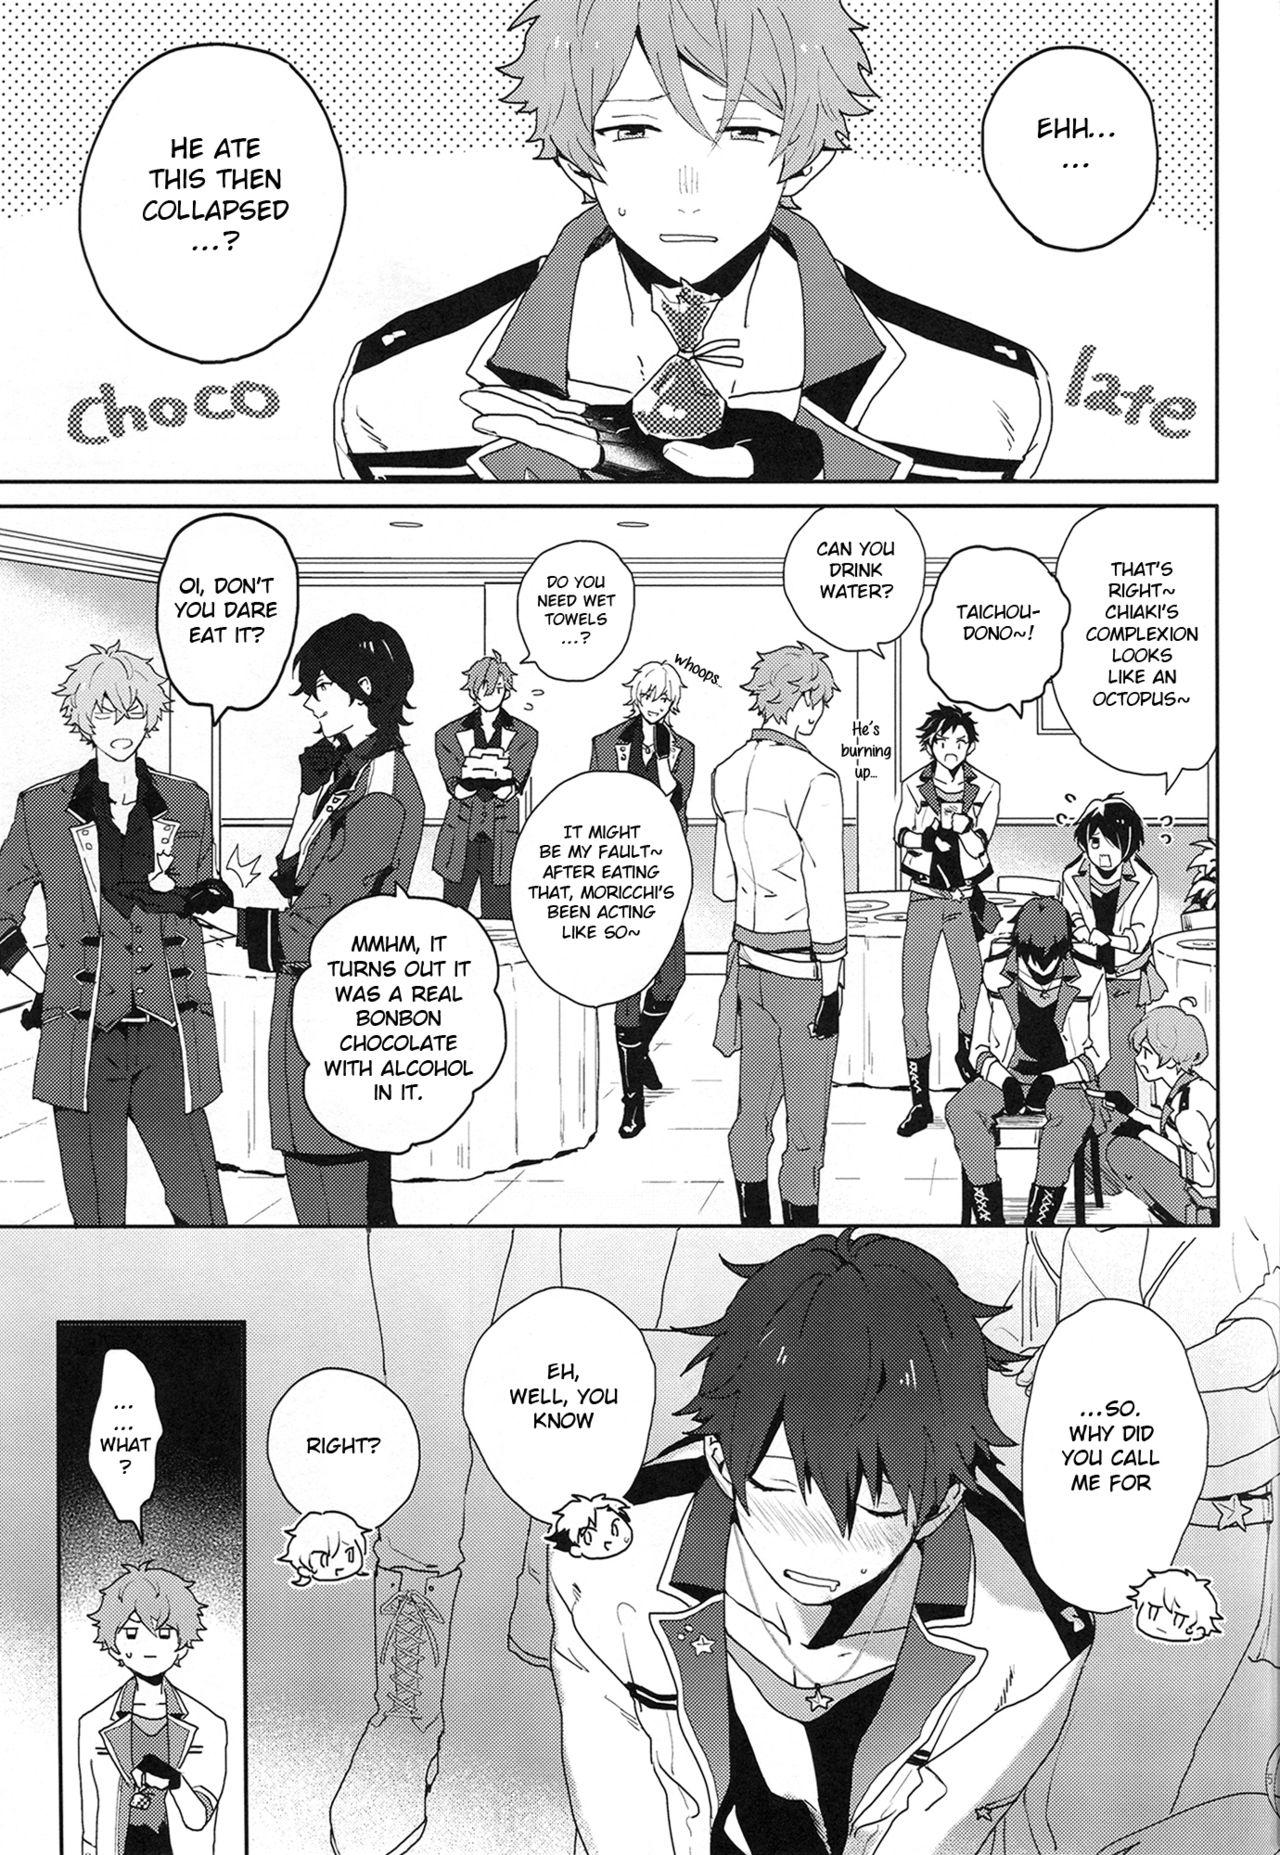 Gay Bukkakeboys After the Holiday Party! - Ensemble stars Stepfather - Page 5